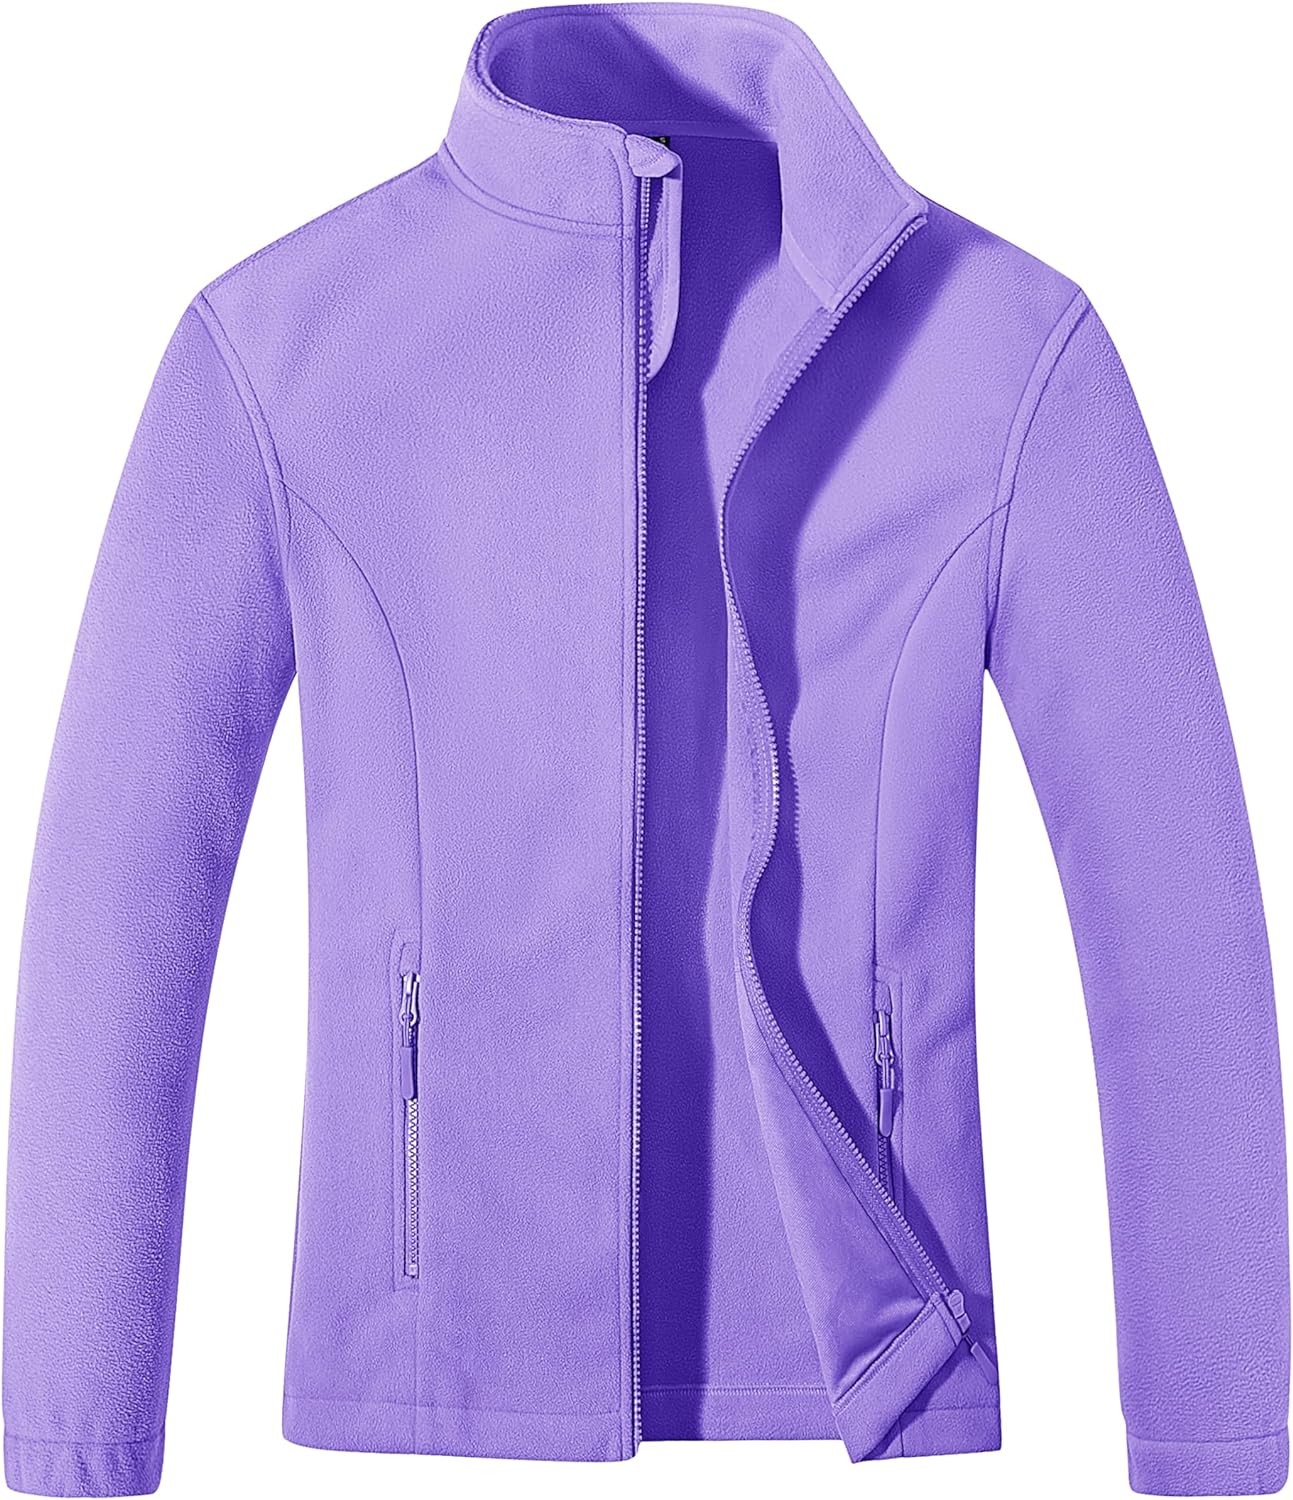 Limited-Time Promo: MAGCOMSEN Women's Fleece Jacket - Save Big on Your Purchase!